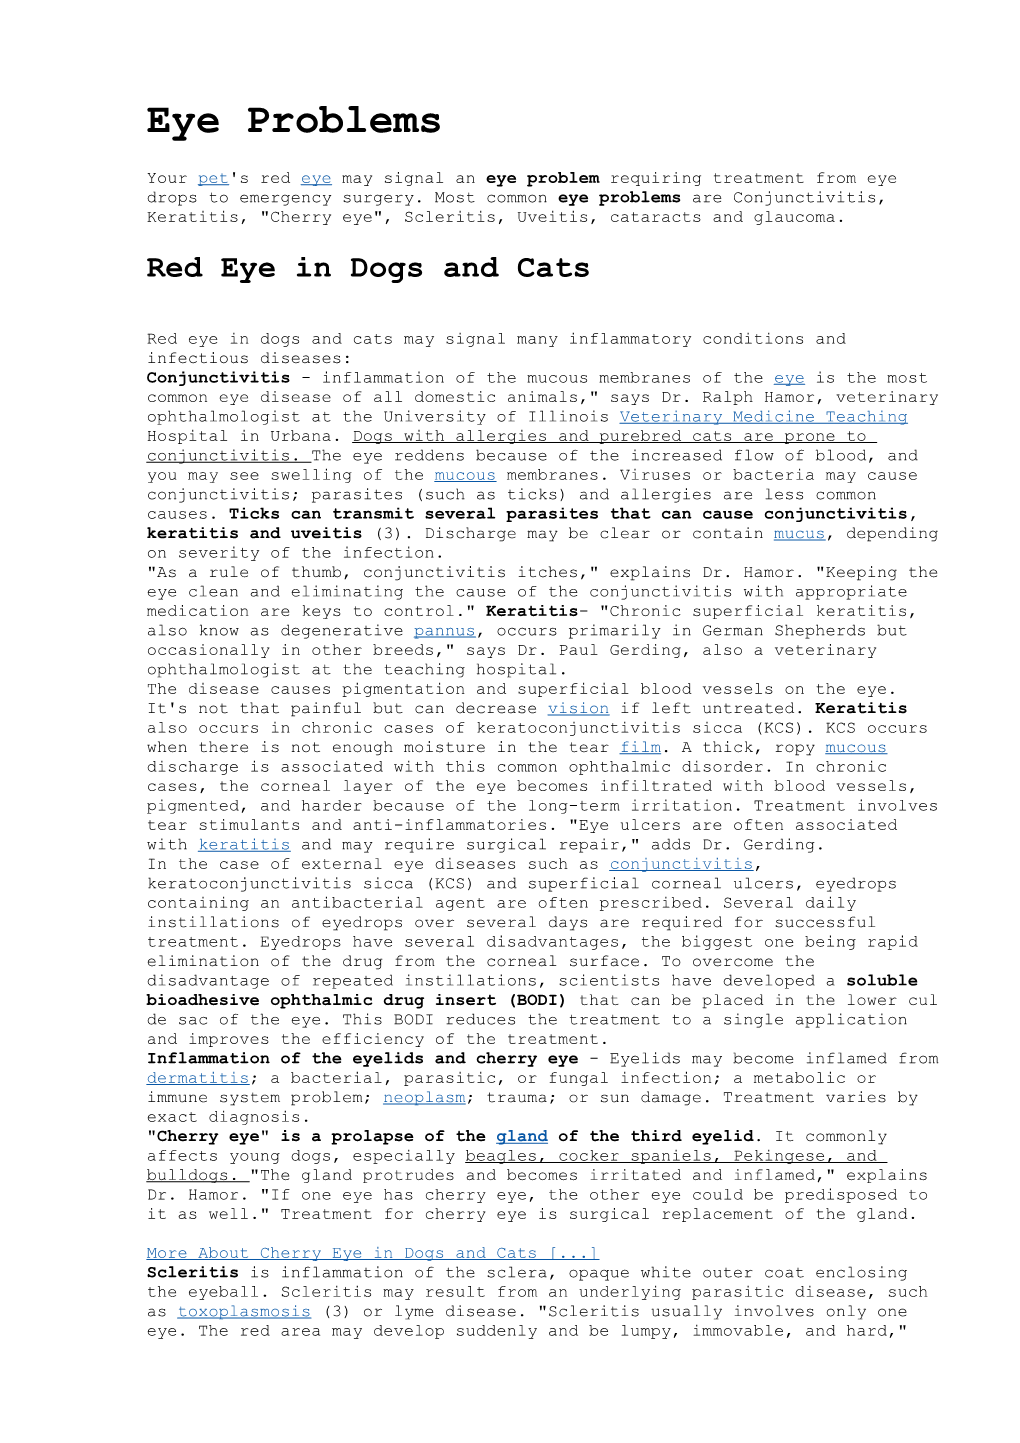 Red Eye in Dogs and Cats